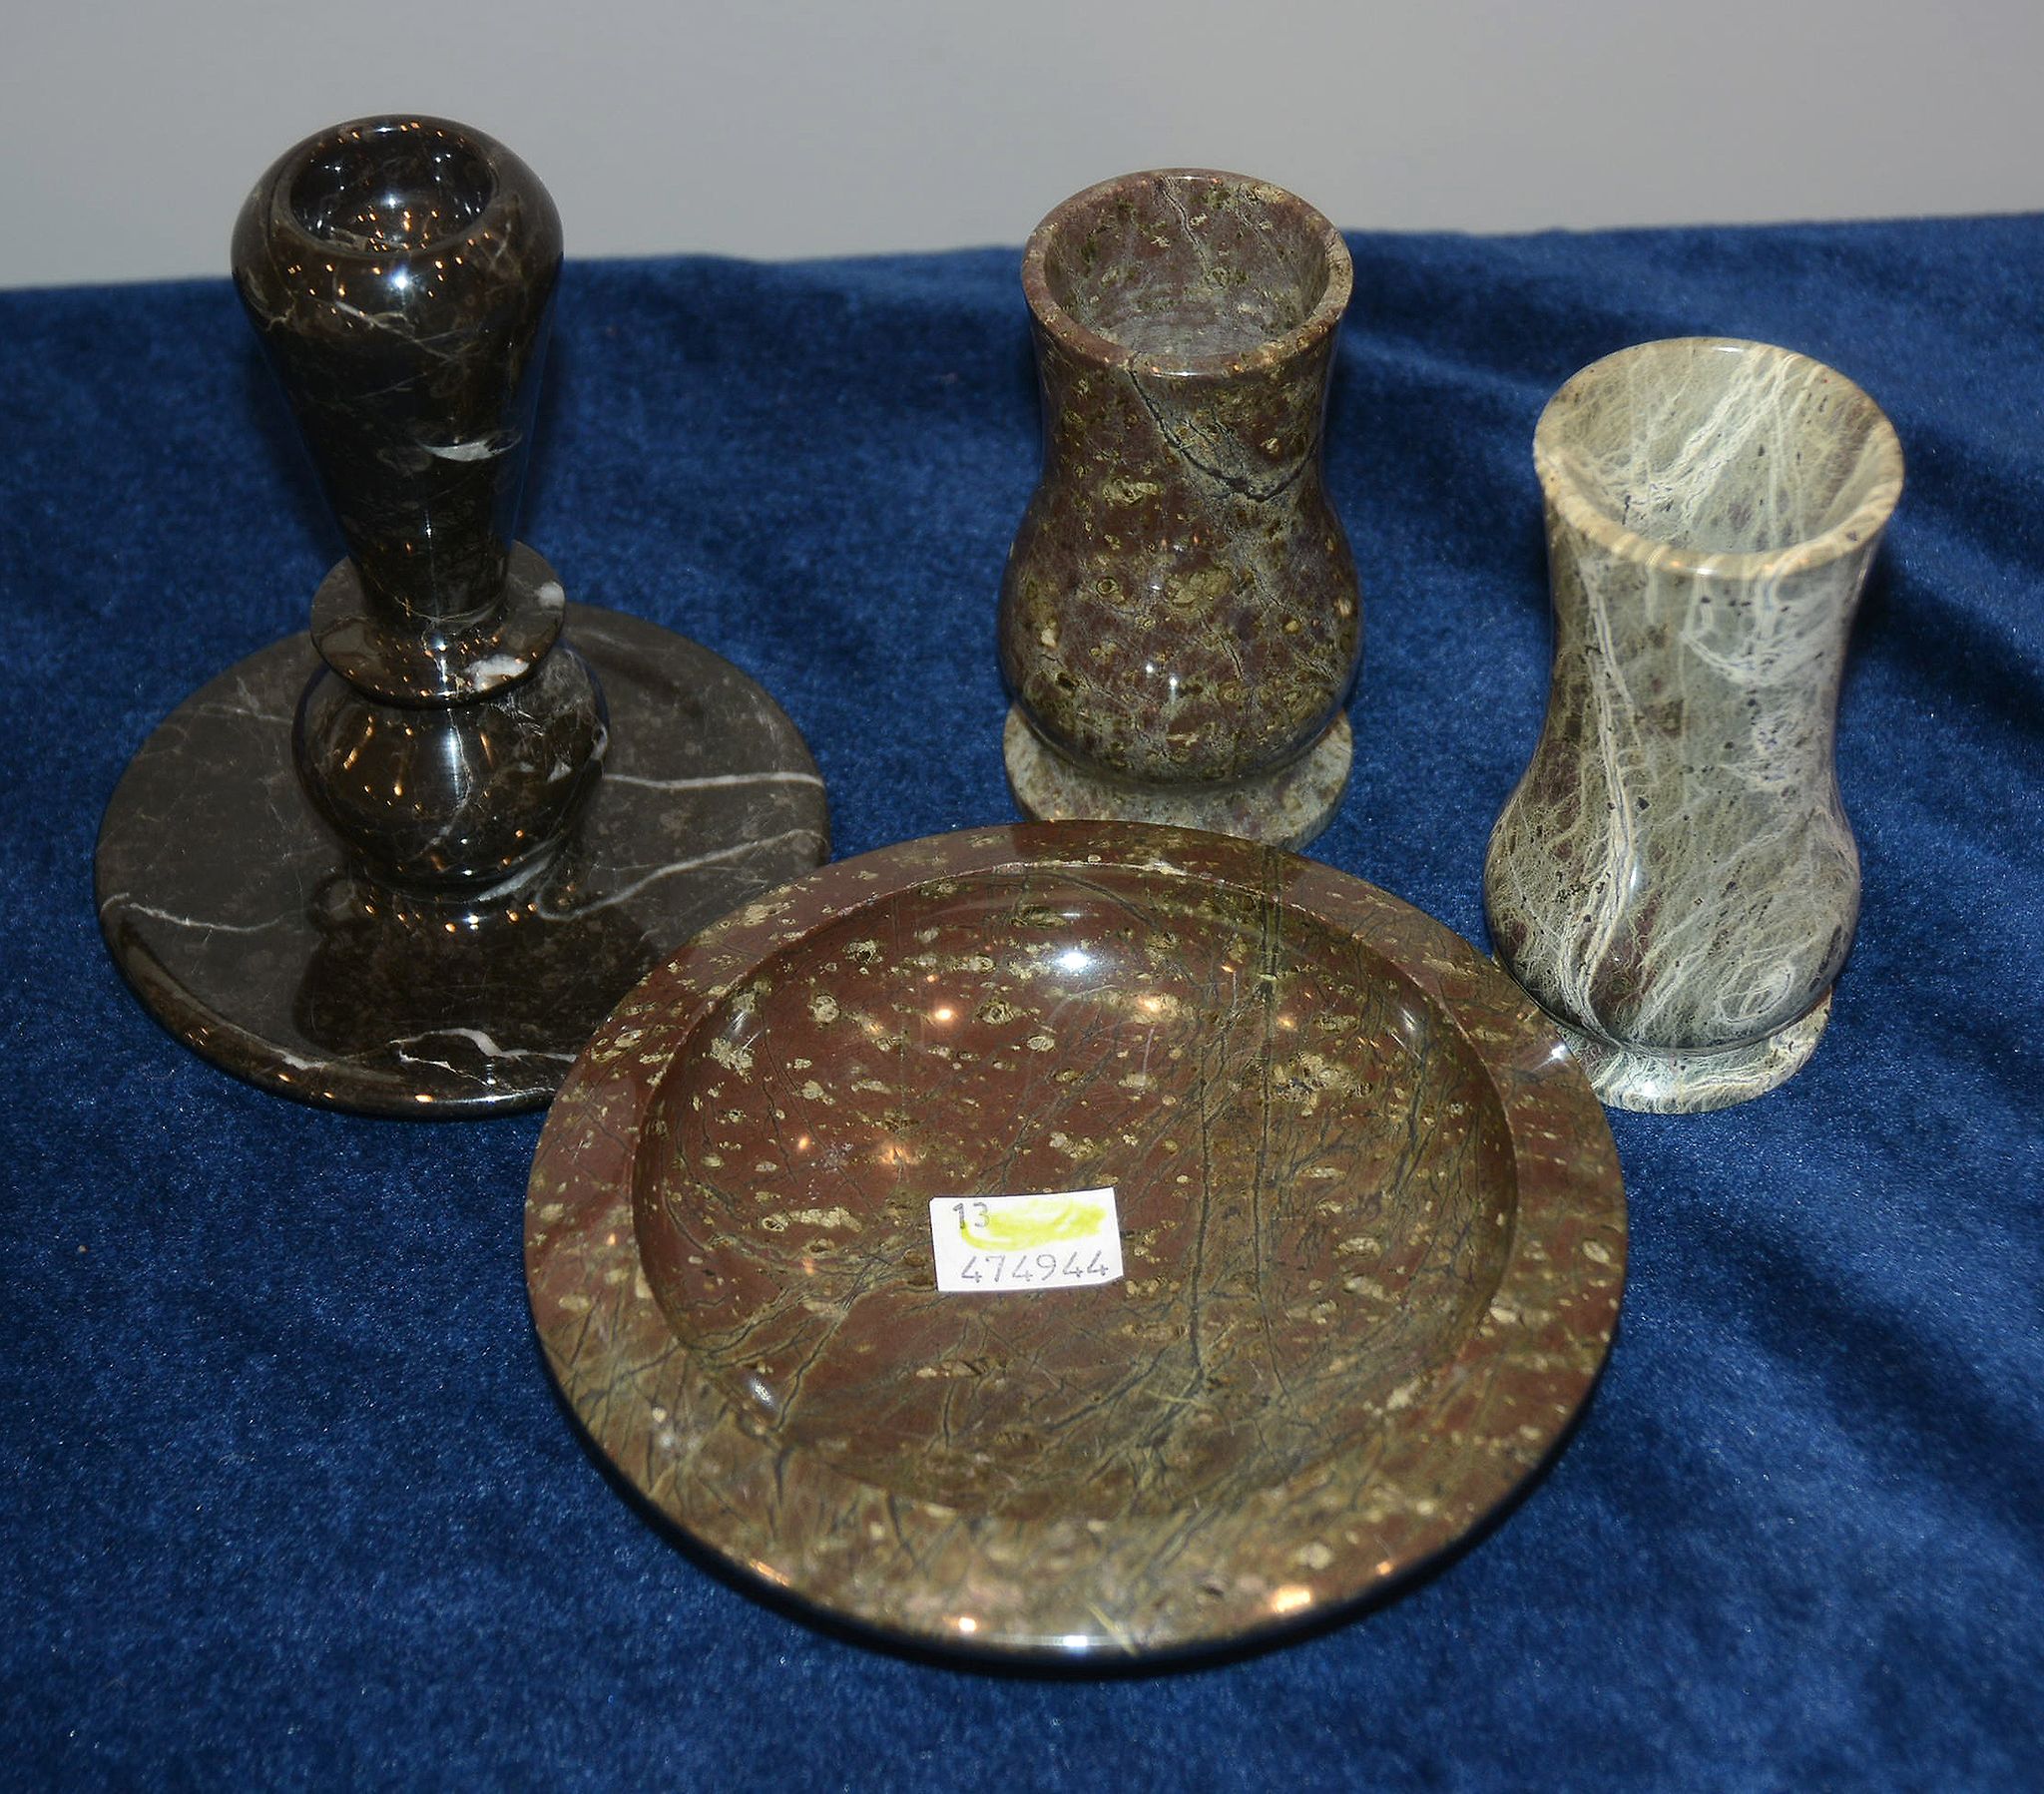 Four serpentine marble items including a taperstick, a dish, and two baluster vases